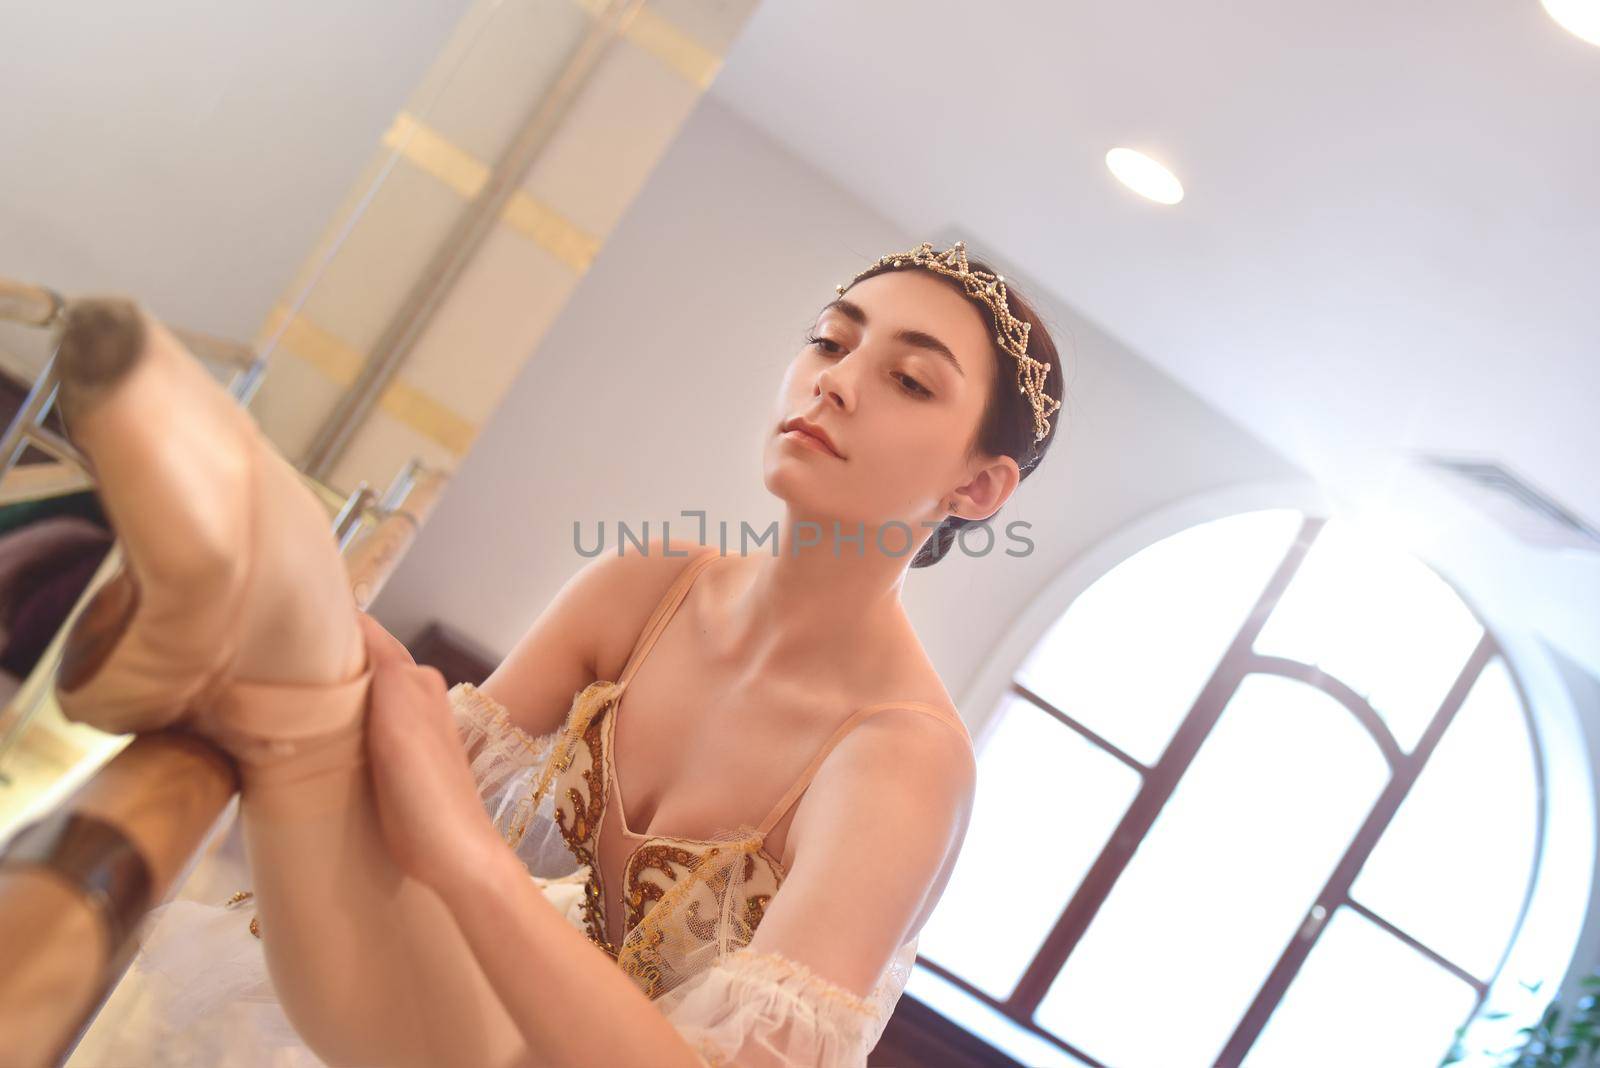 Ballerina stretches herself near barre and mirrors in the classroom by Nickstock